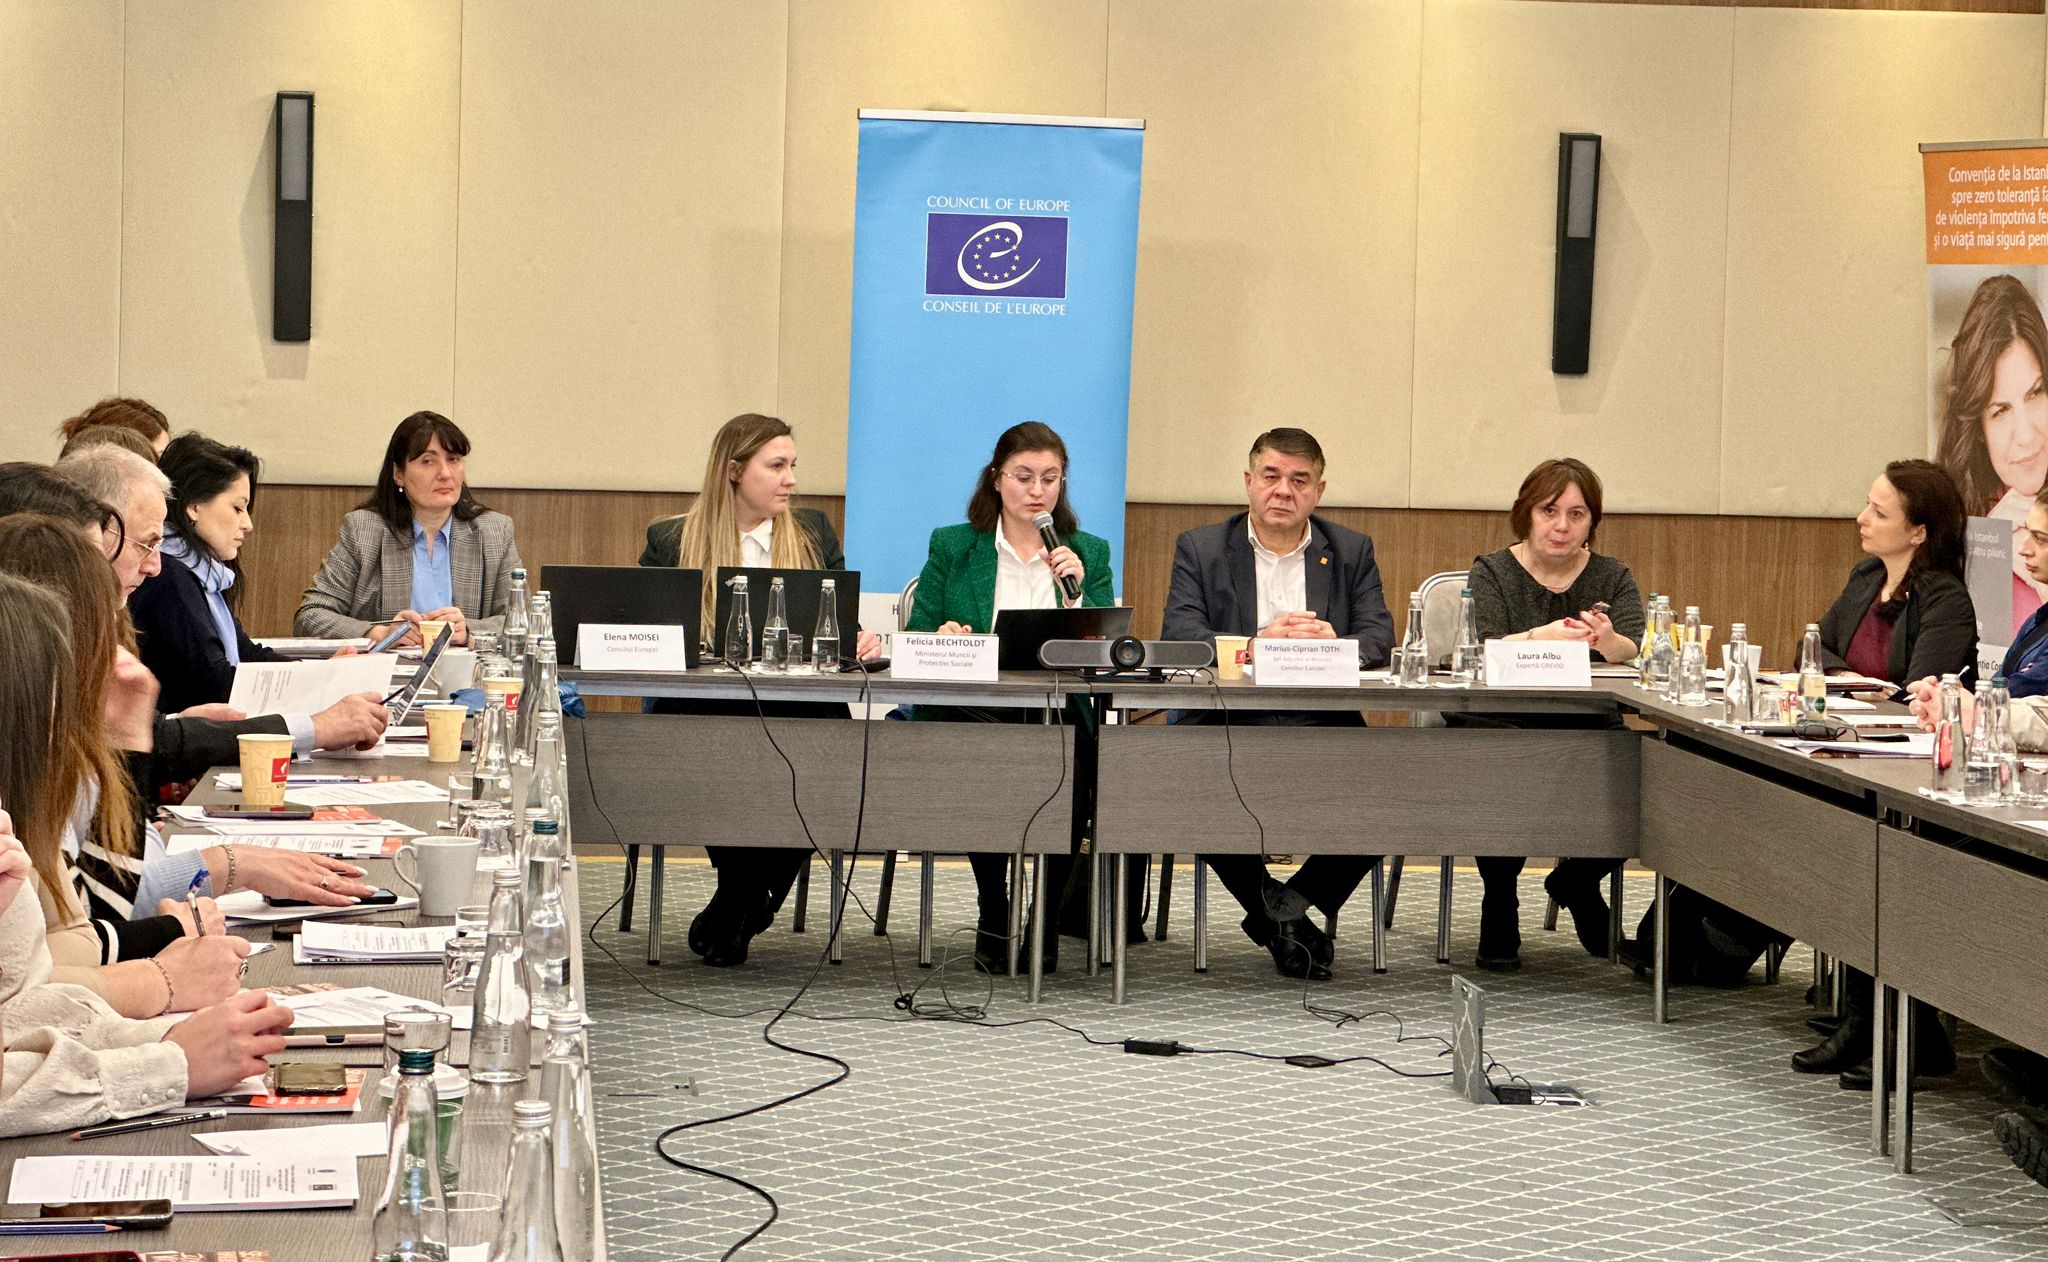 The Council of Europe supports the Republic of Moldova in implementing recommendations from the Group of Experts on Action against Violence against Women and Domestic Violence (GREVIO)